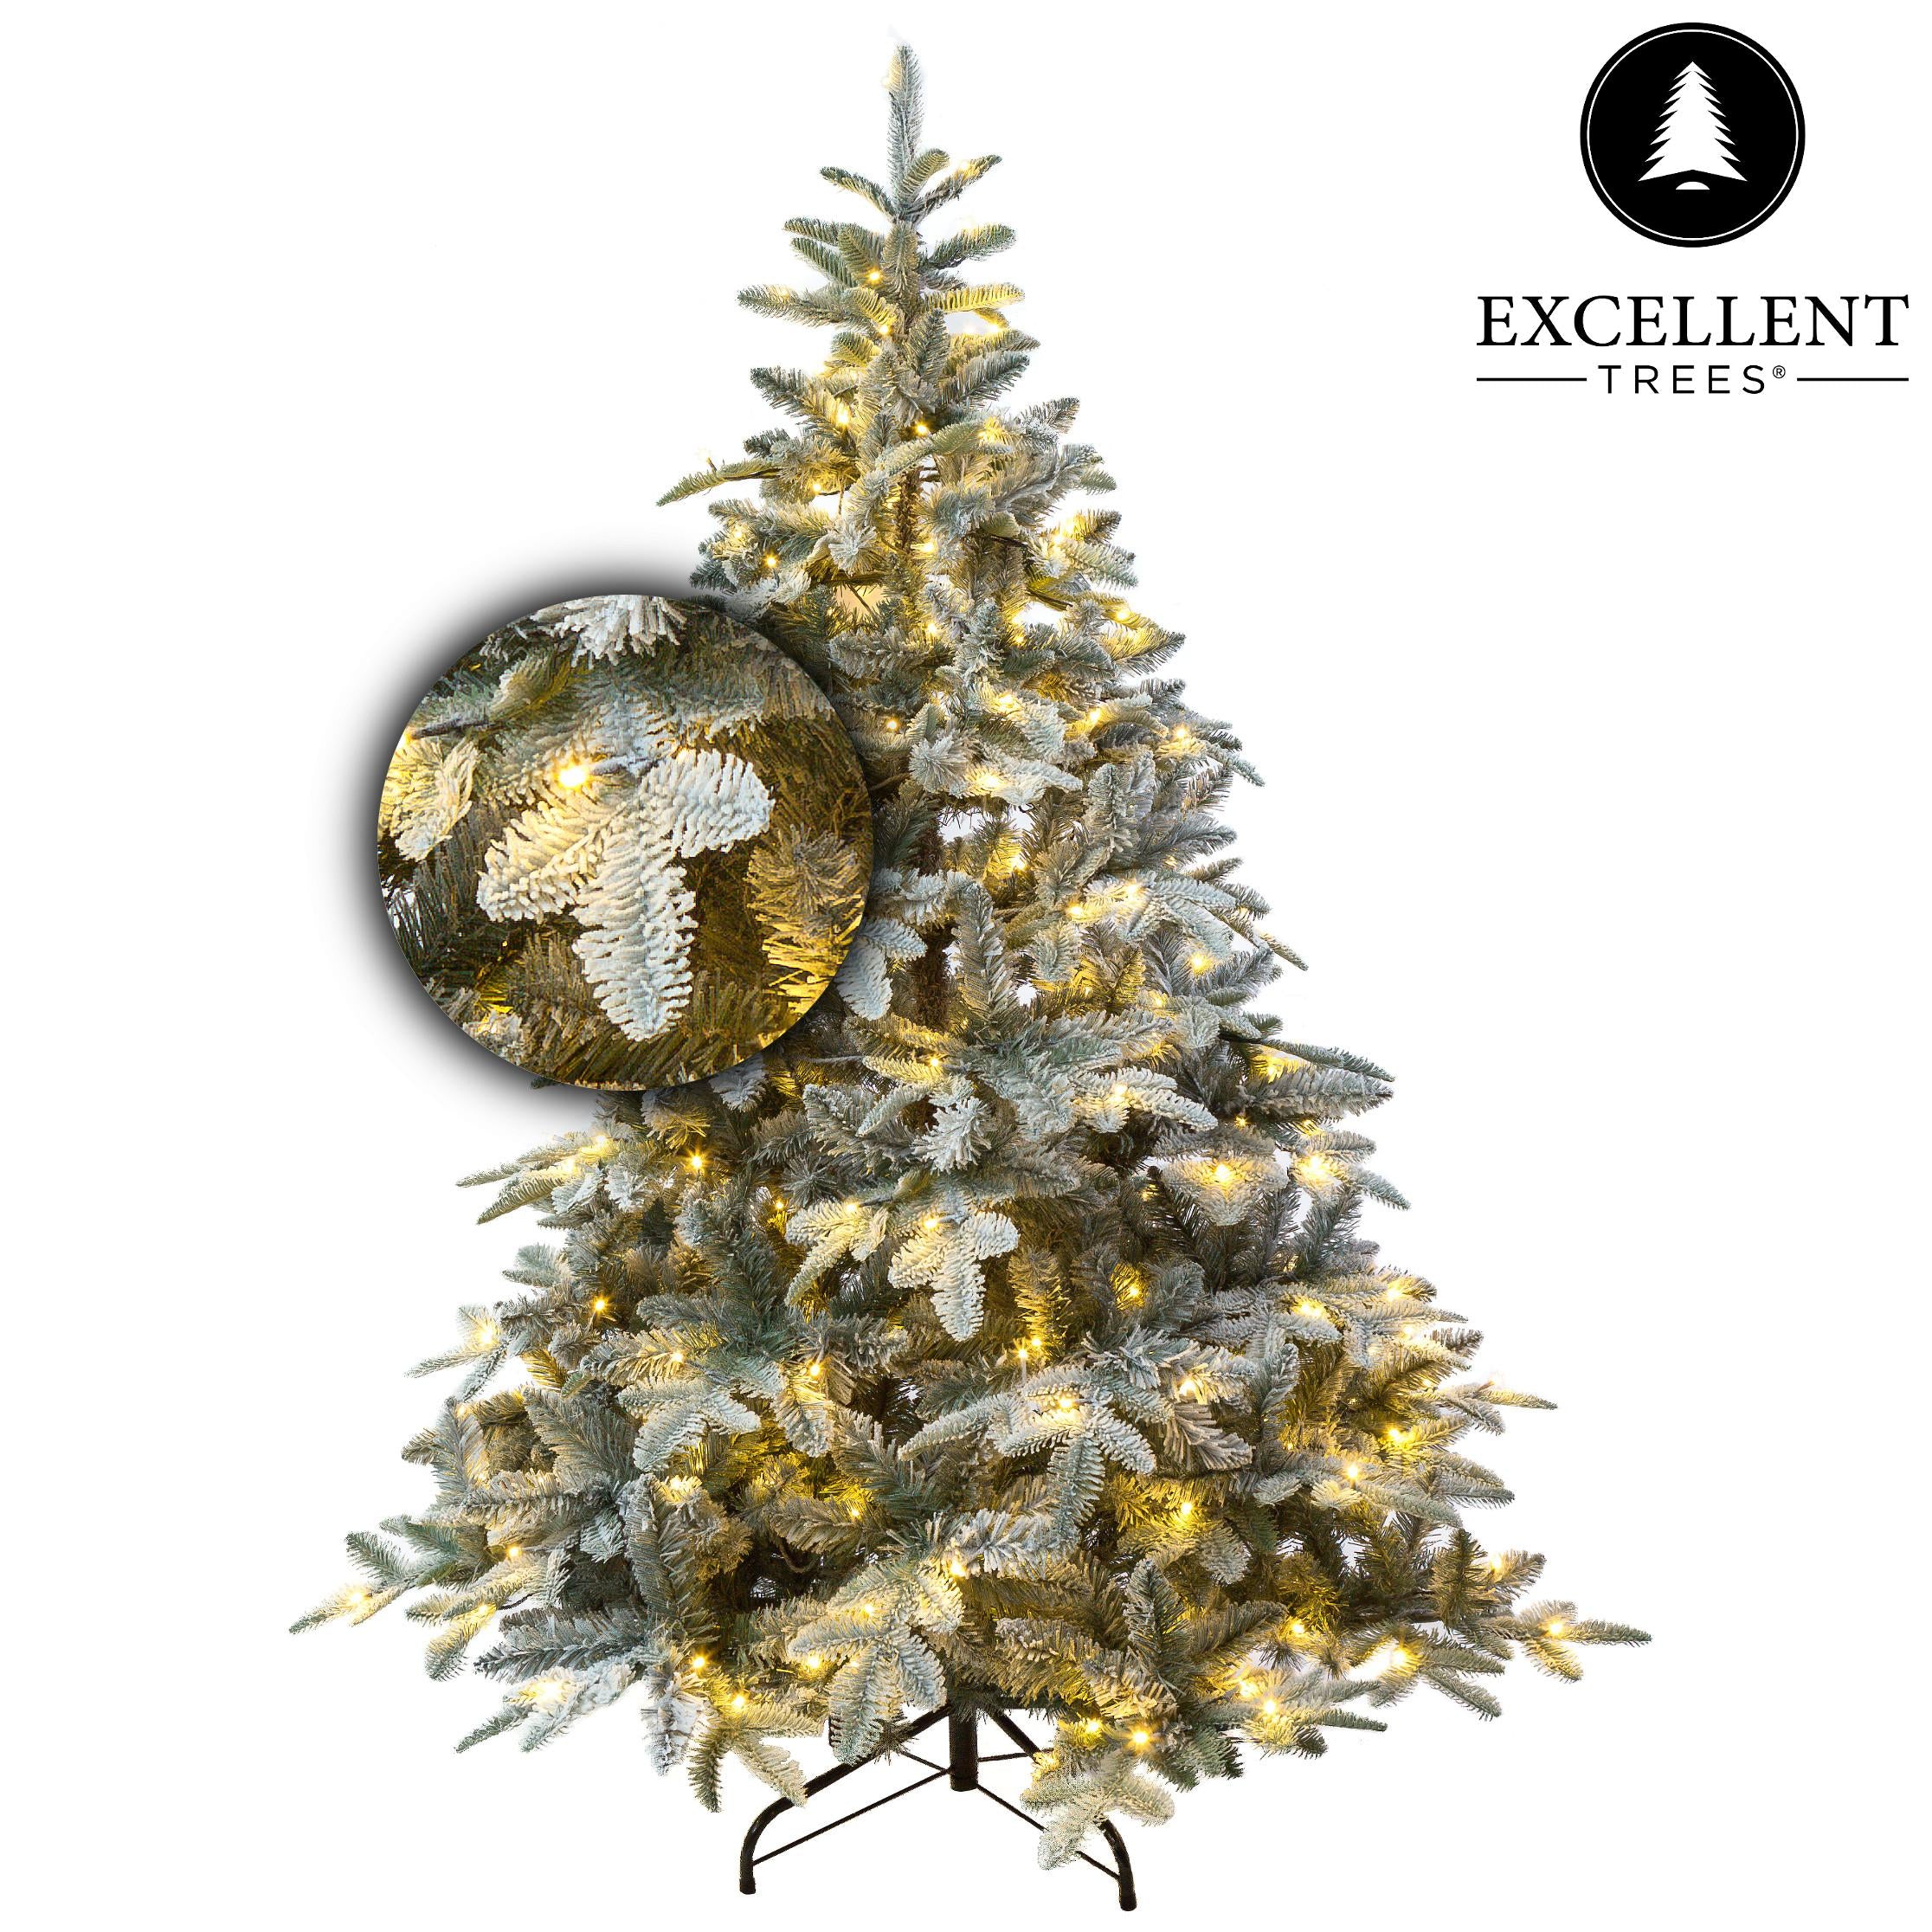 Christmas tree Excellent Trees® LED Otta 180 cm with lighting - Luxury version - 320 lights